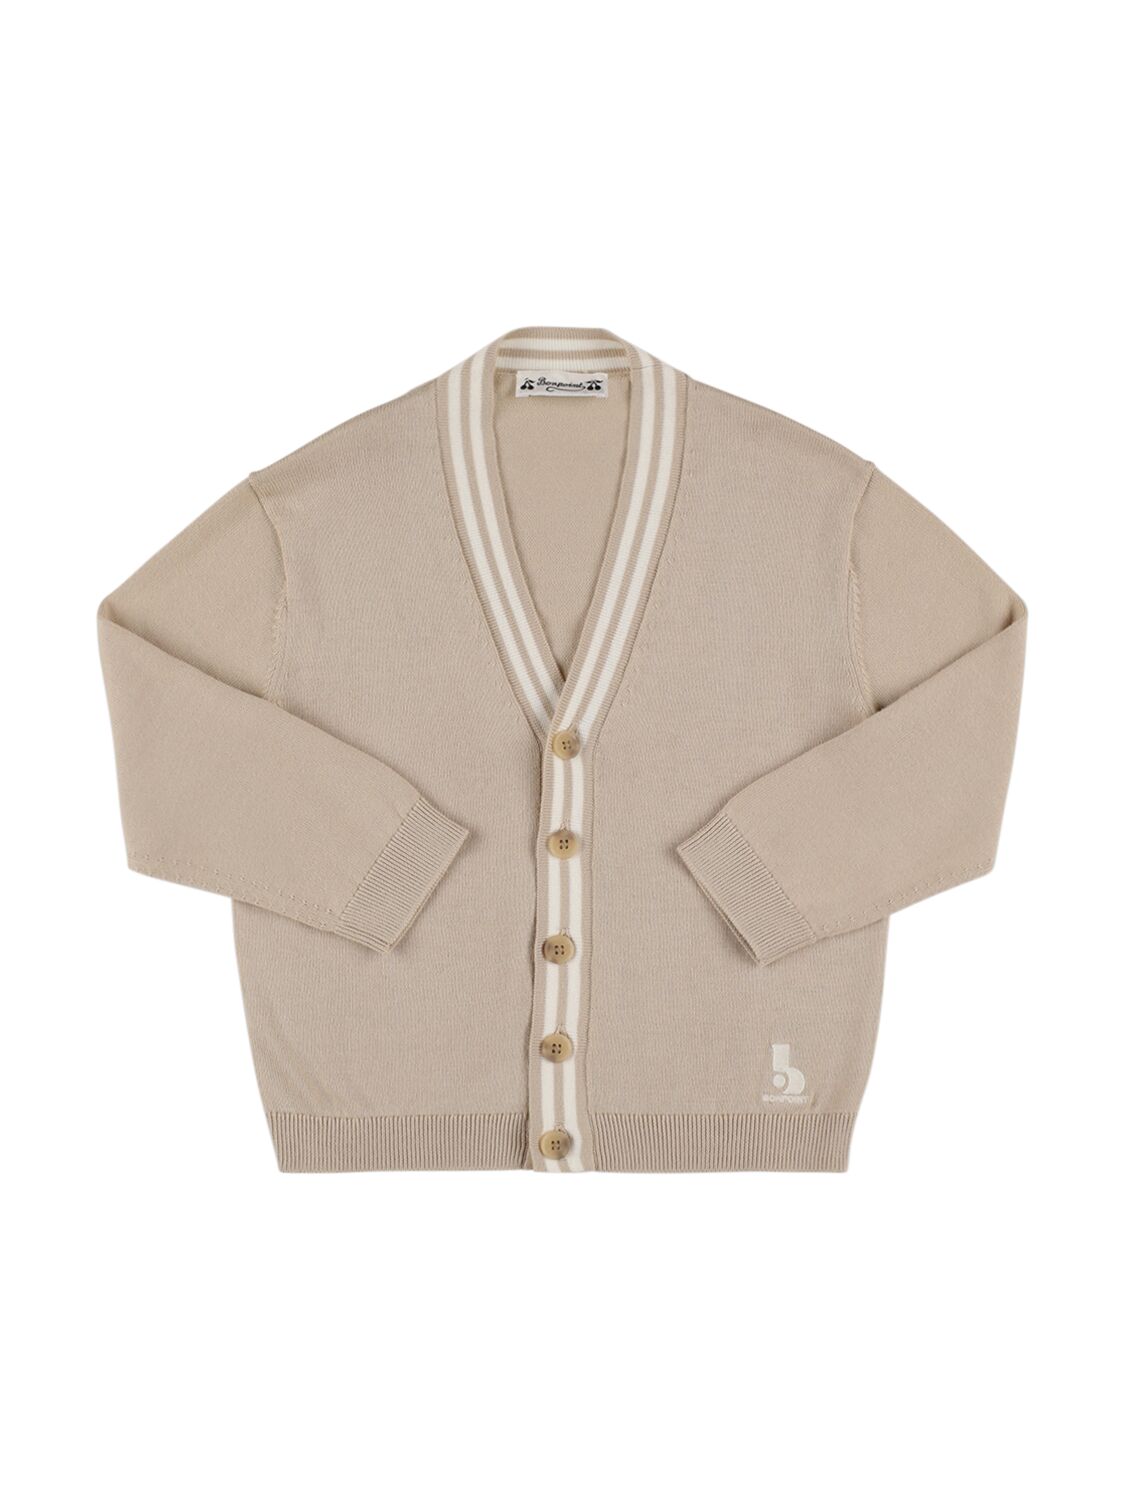 Bonpoint Kids' Cotton Knit Cardigan In 베이지